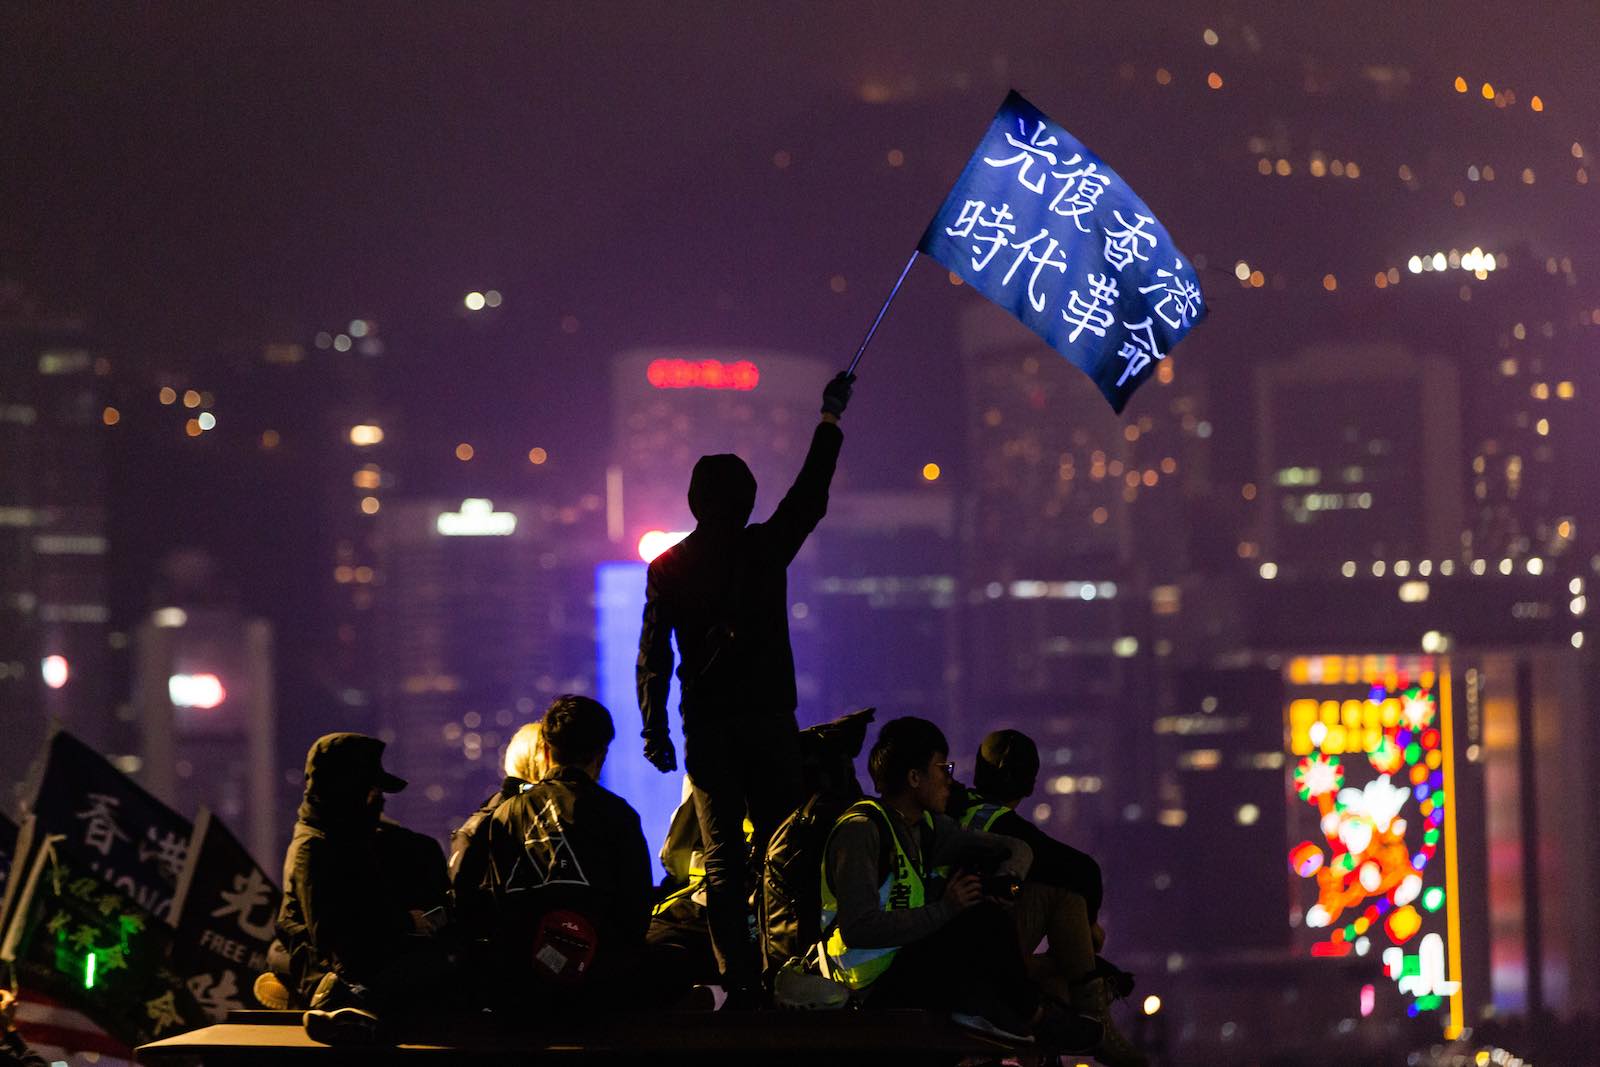 A protester waves a "Liberate Hong Kong" flag during demonstrations in December (Willie Siau via Getty Images)